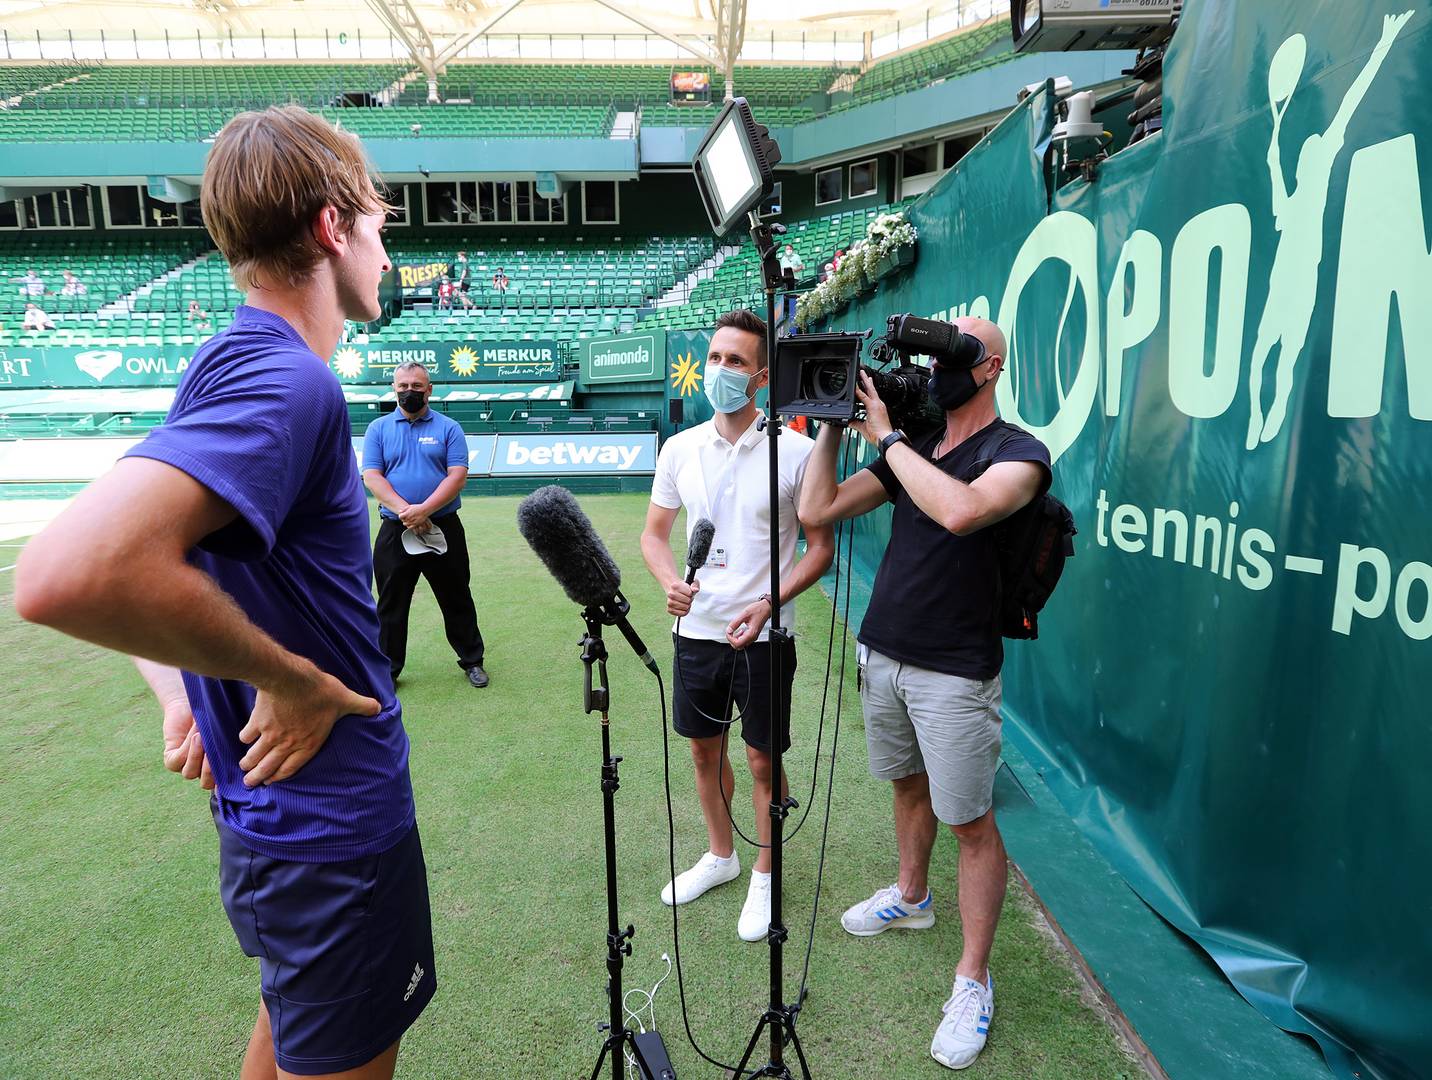 Broadcasting to over 150 Countries of ATP 500-Grass Event at Halle